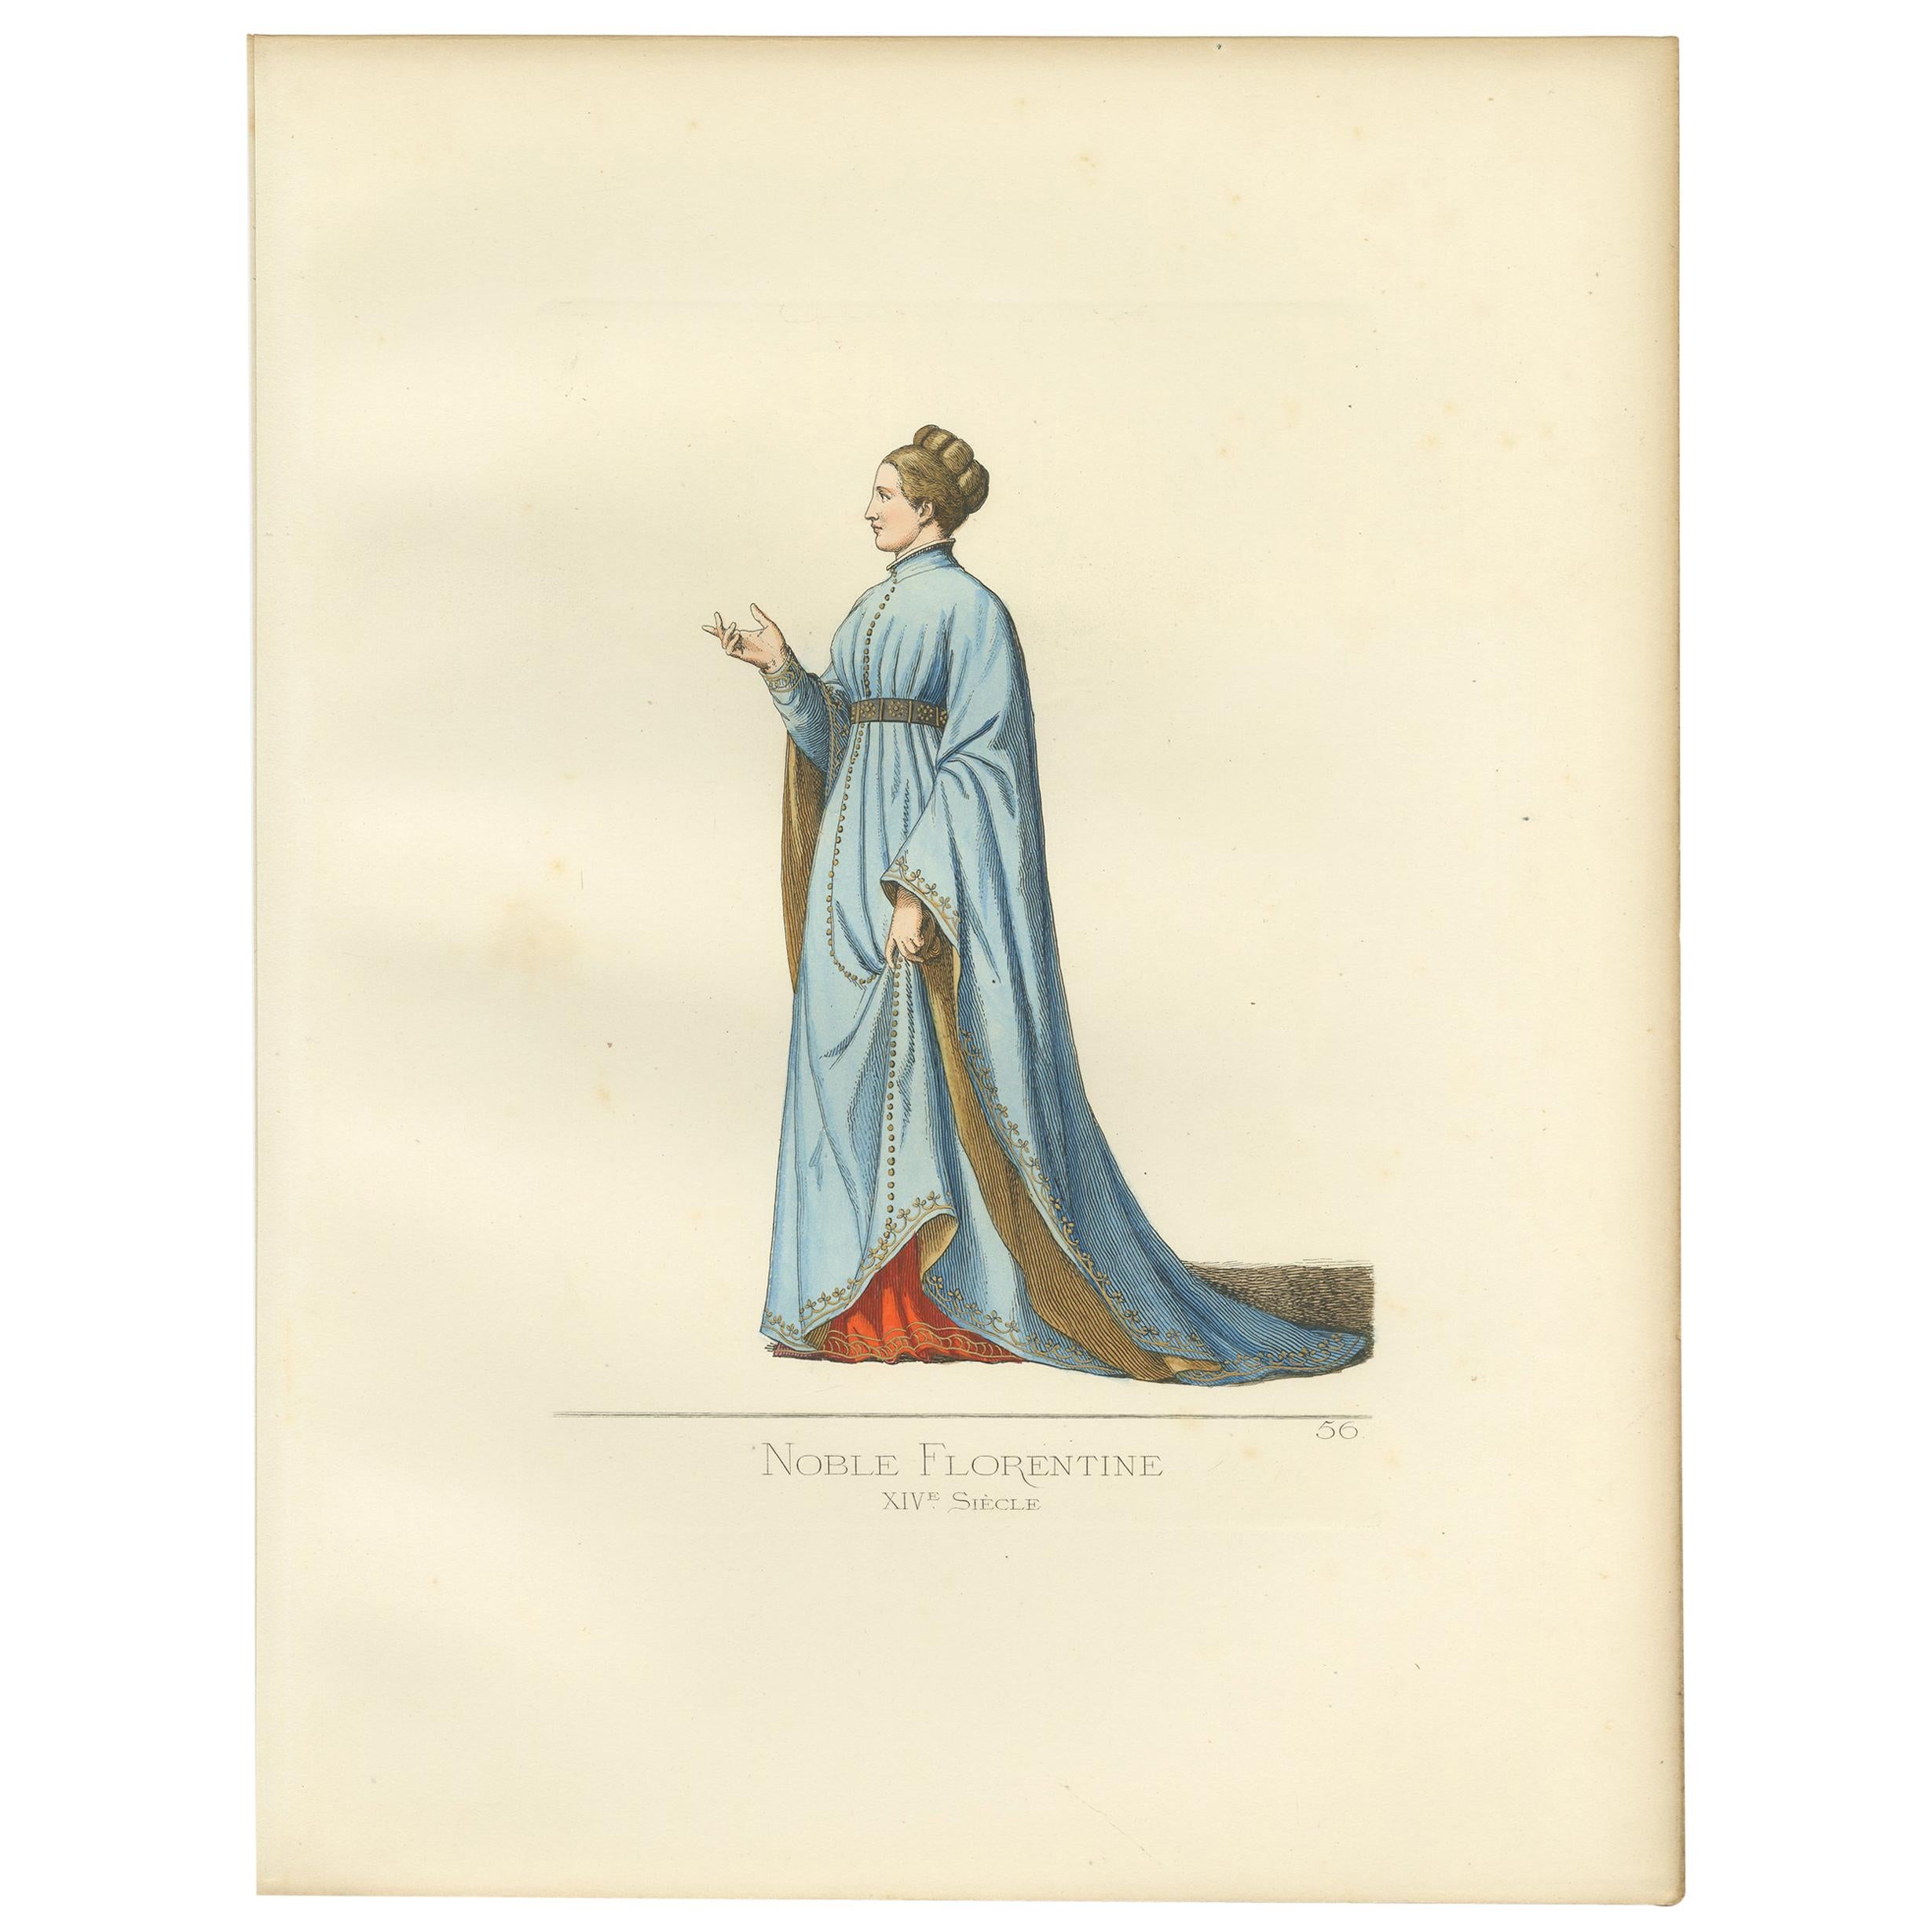 Antique Print of a Noblewoman from Florence, 14th Century, by Bonnard, 1860